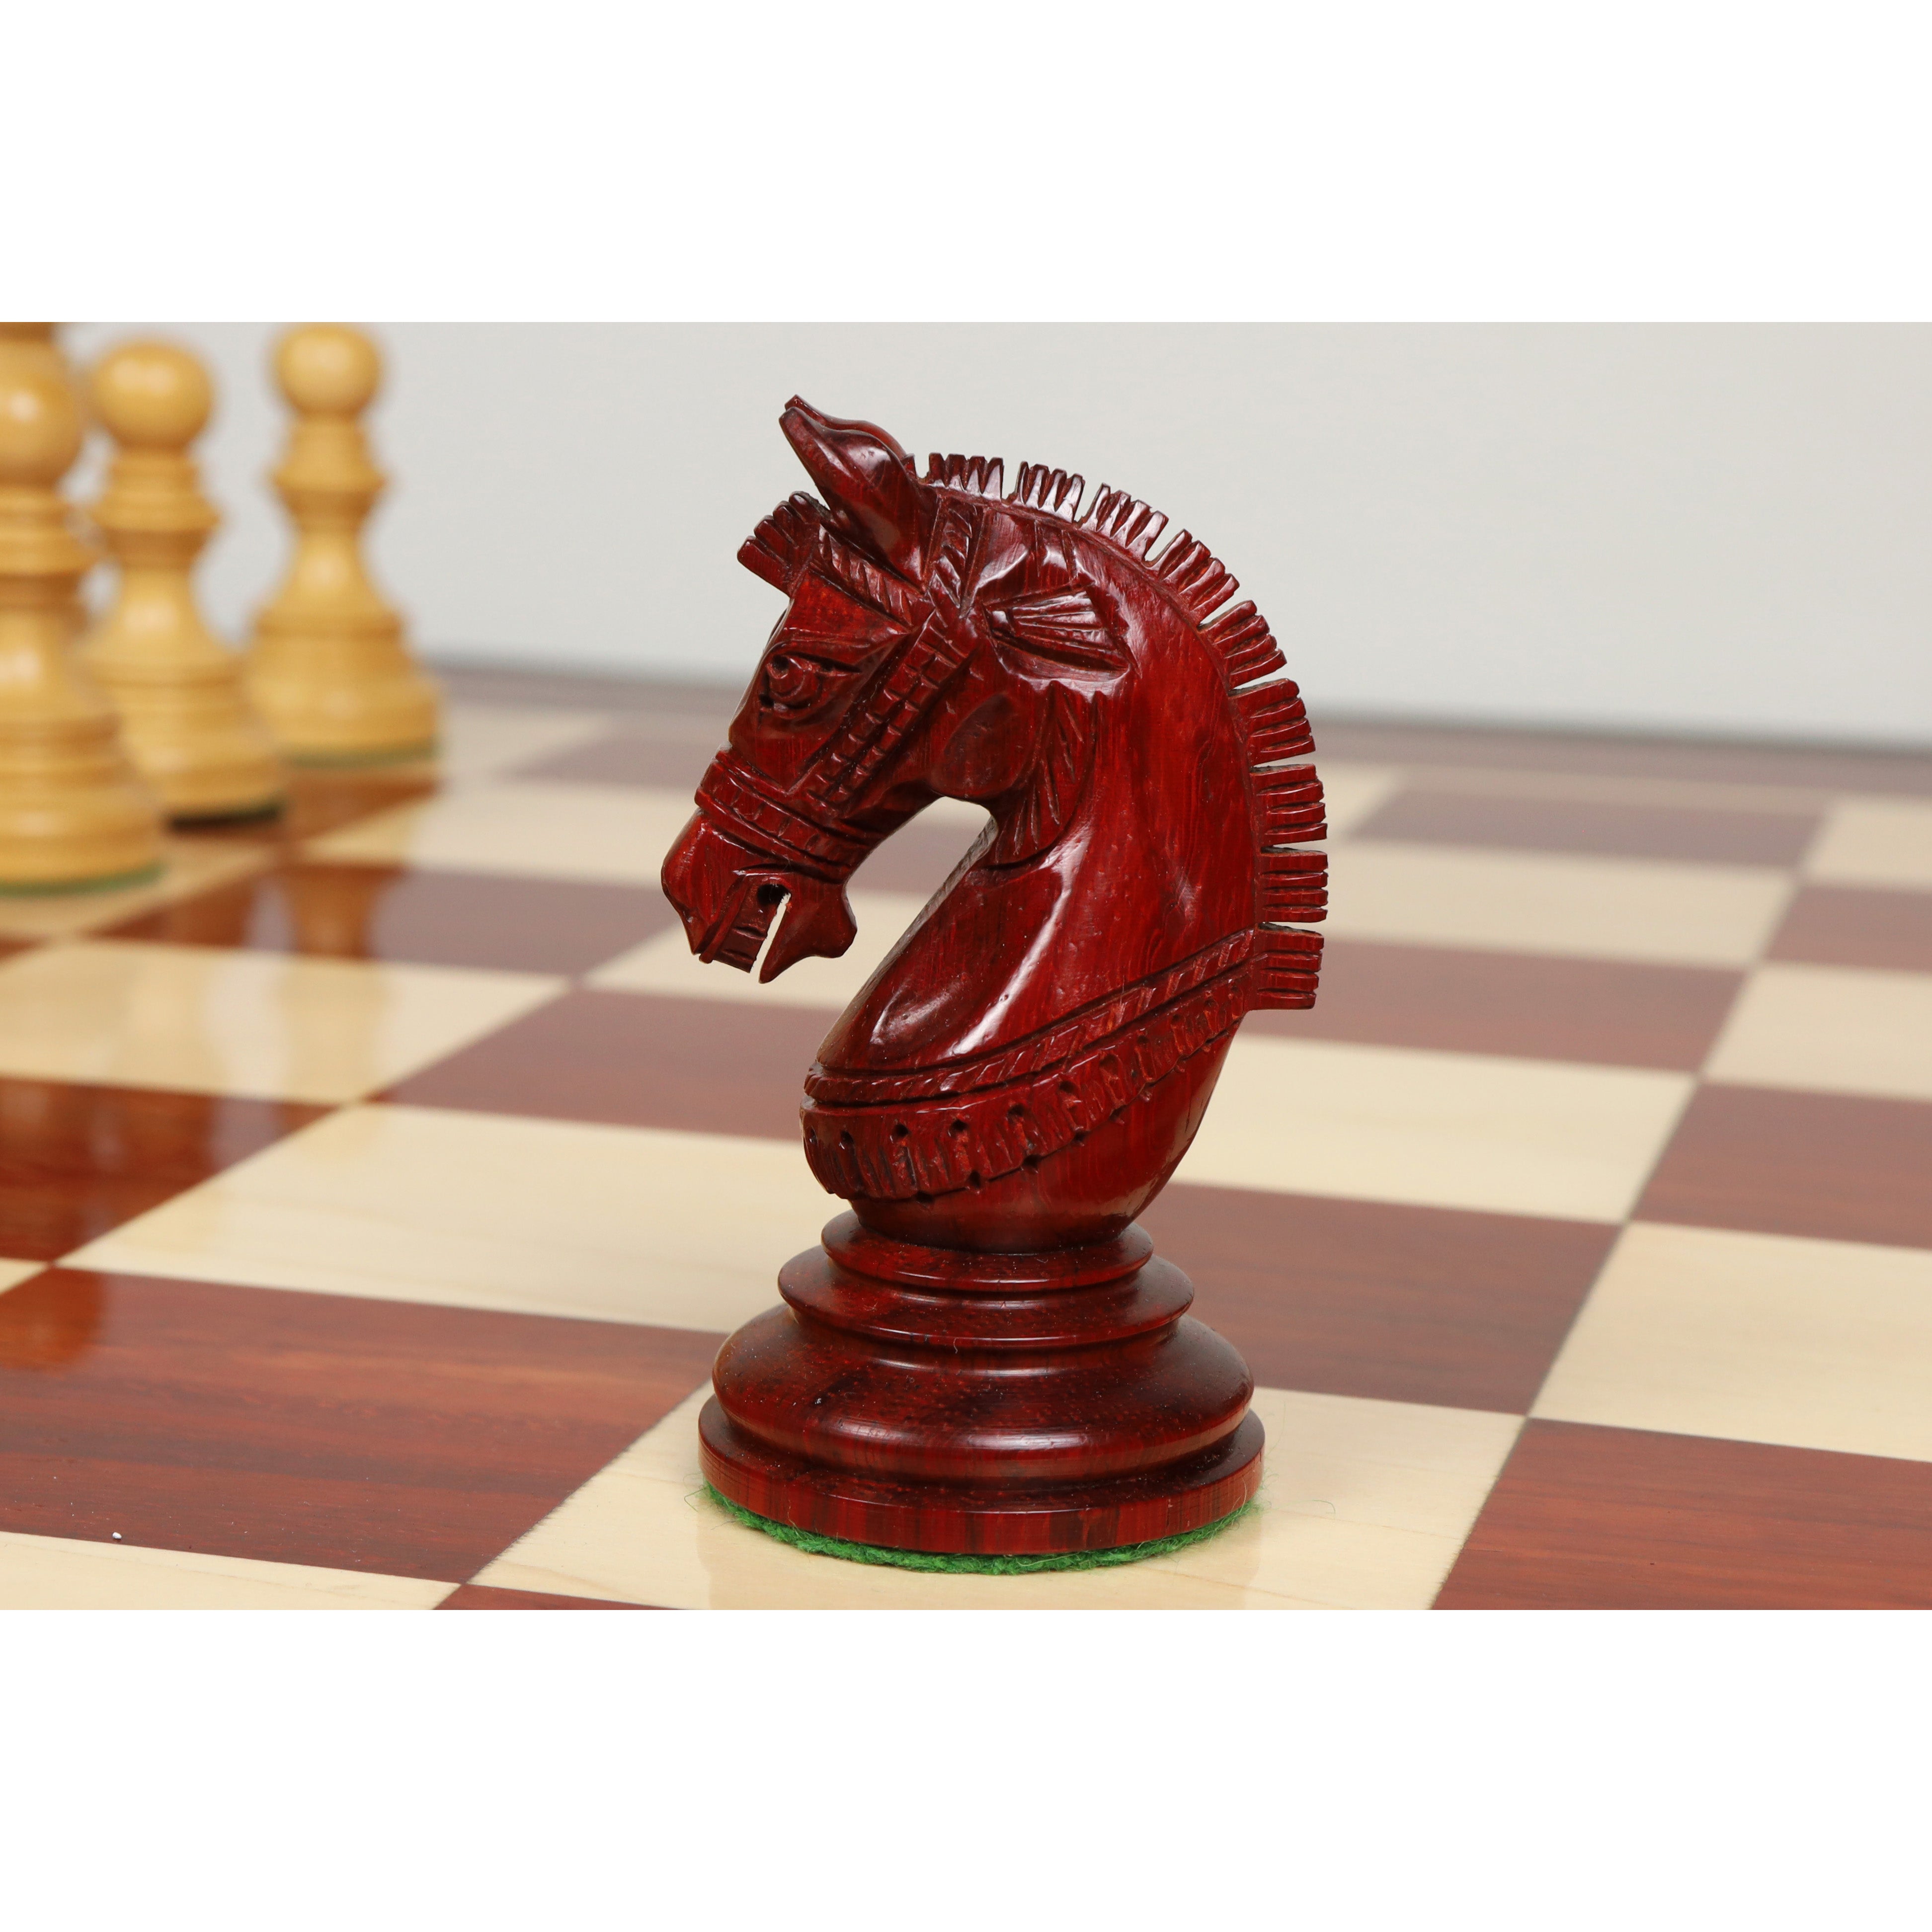 Combo of Knight & Pawns Chess Pieces in Bud Rosewood & Box